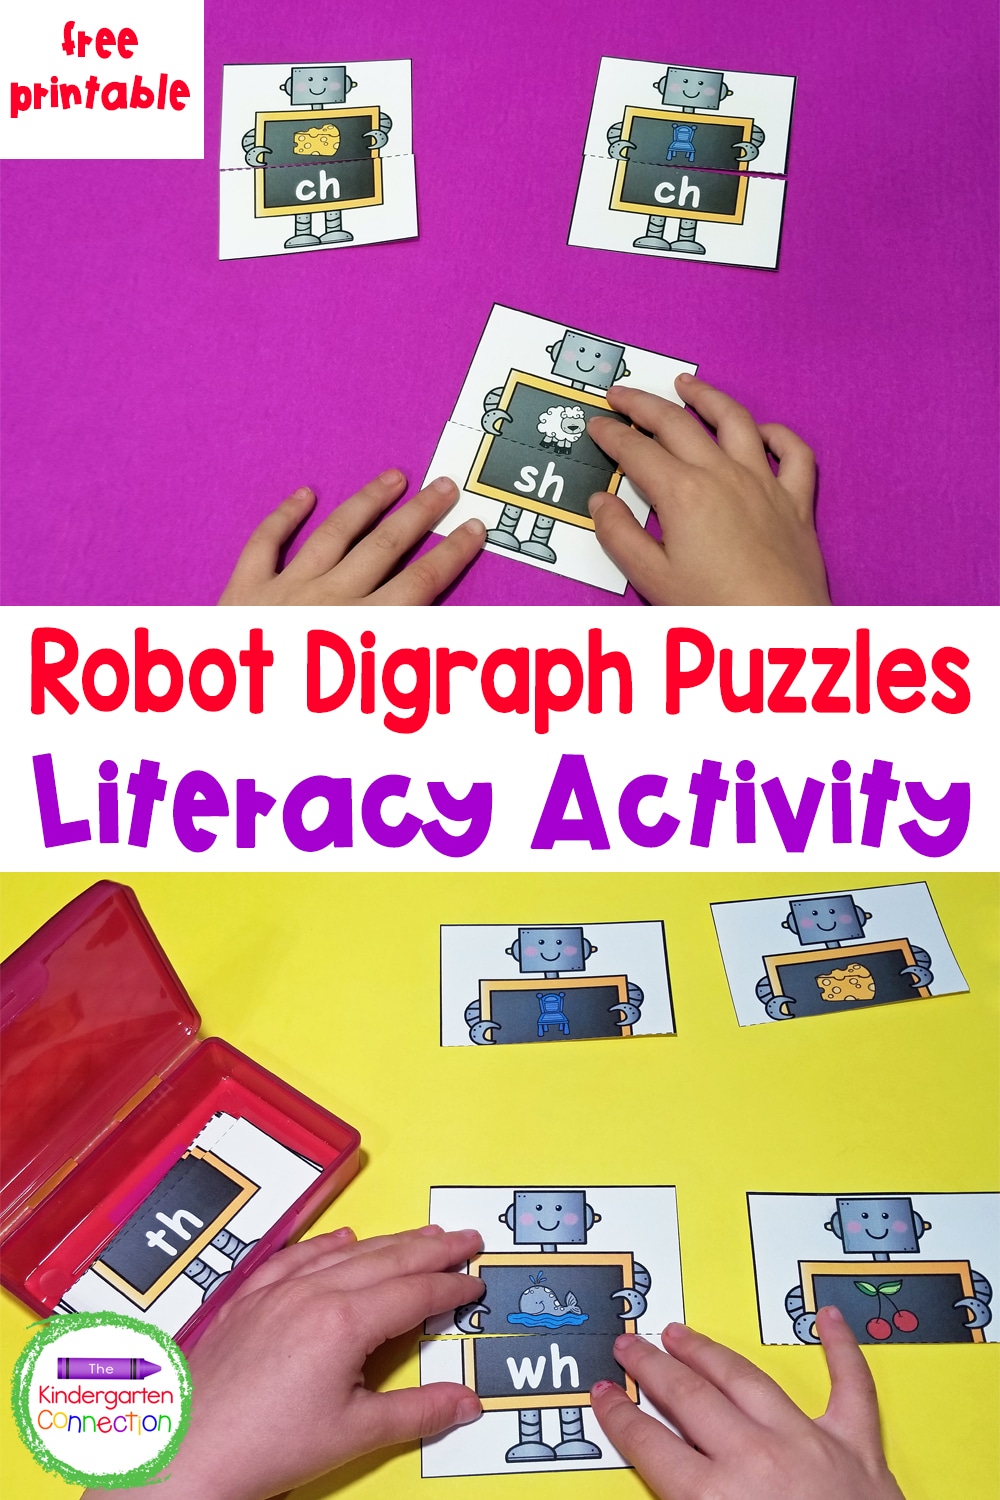 Have fun reading digraphs in small groups or literacy centers with these free printable Robot Beginning Digraph Puzzles for early readers!